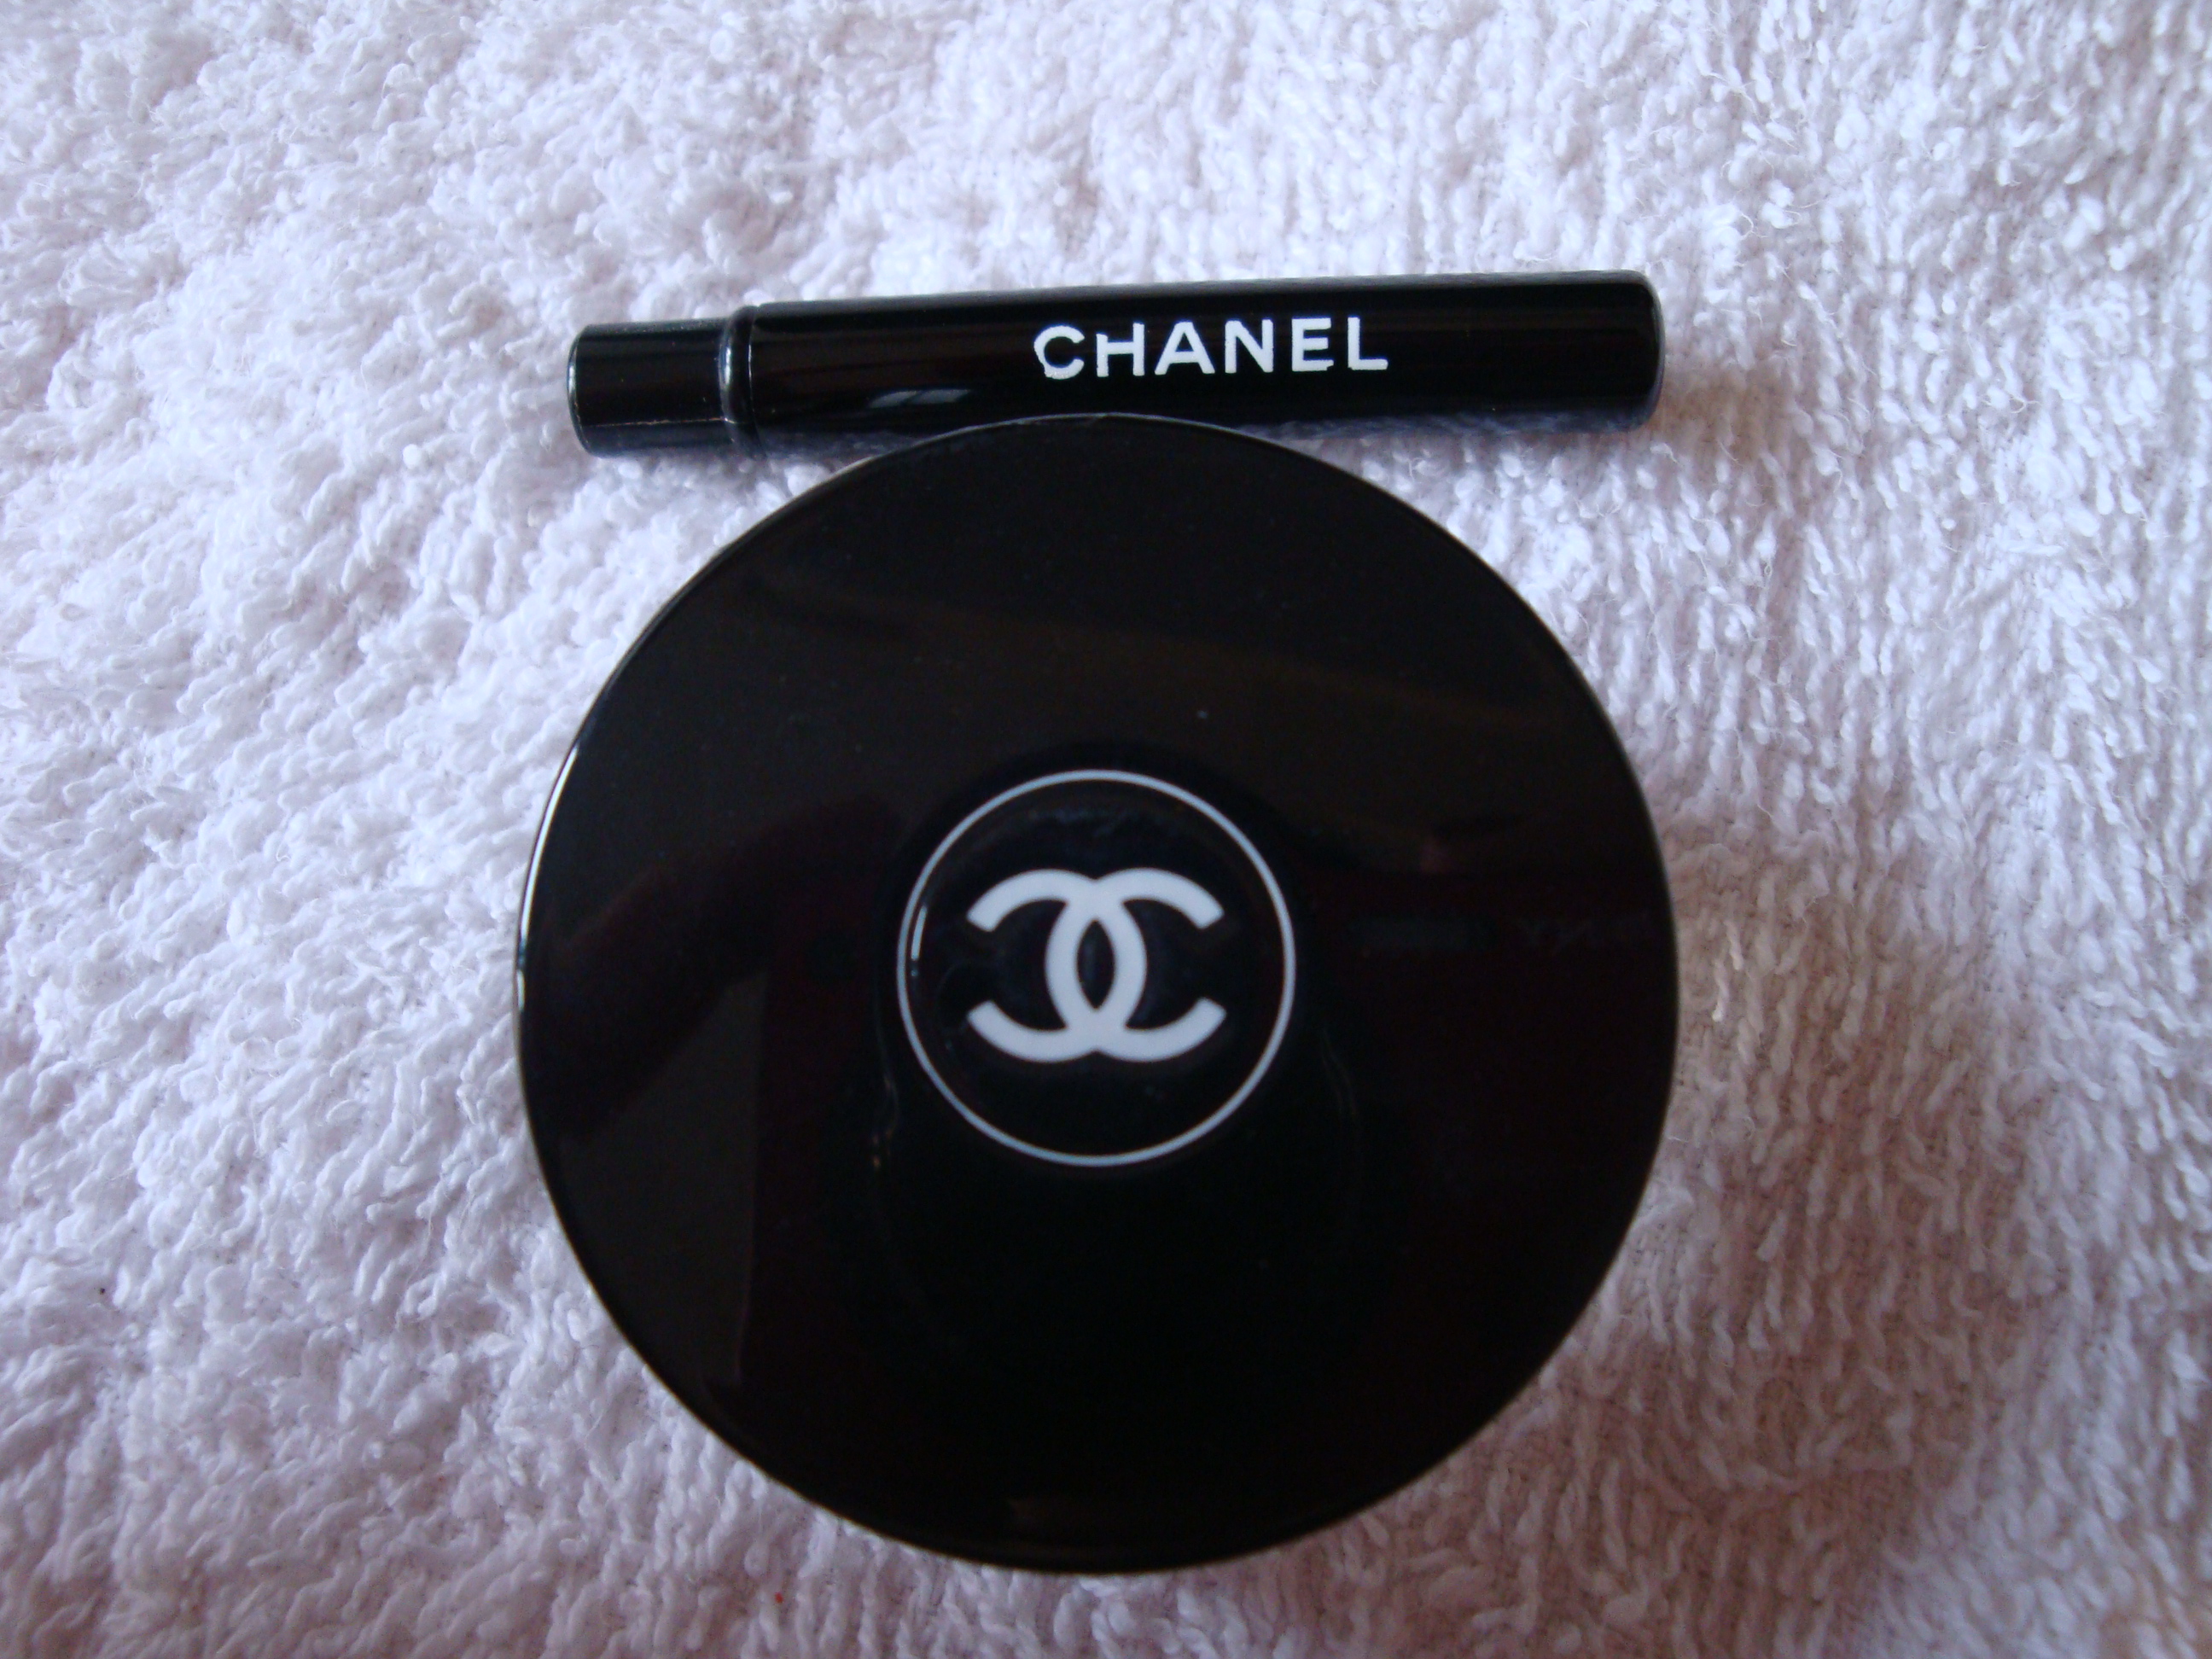 Chanel illusion d'ombre packaging